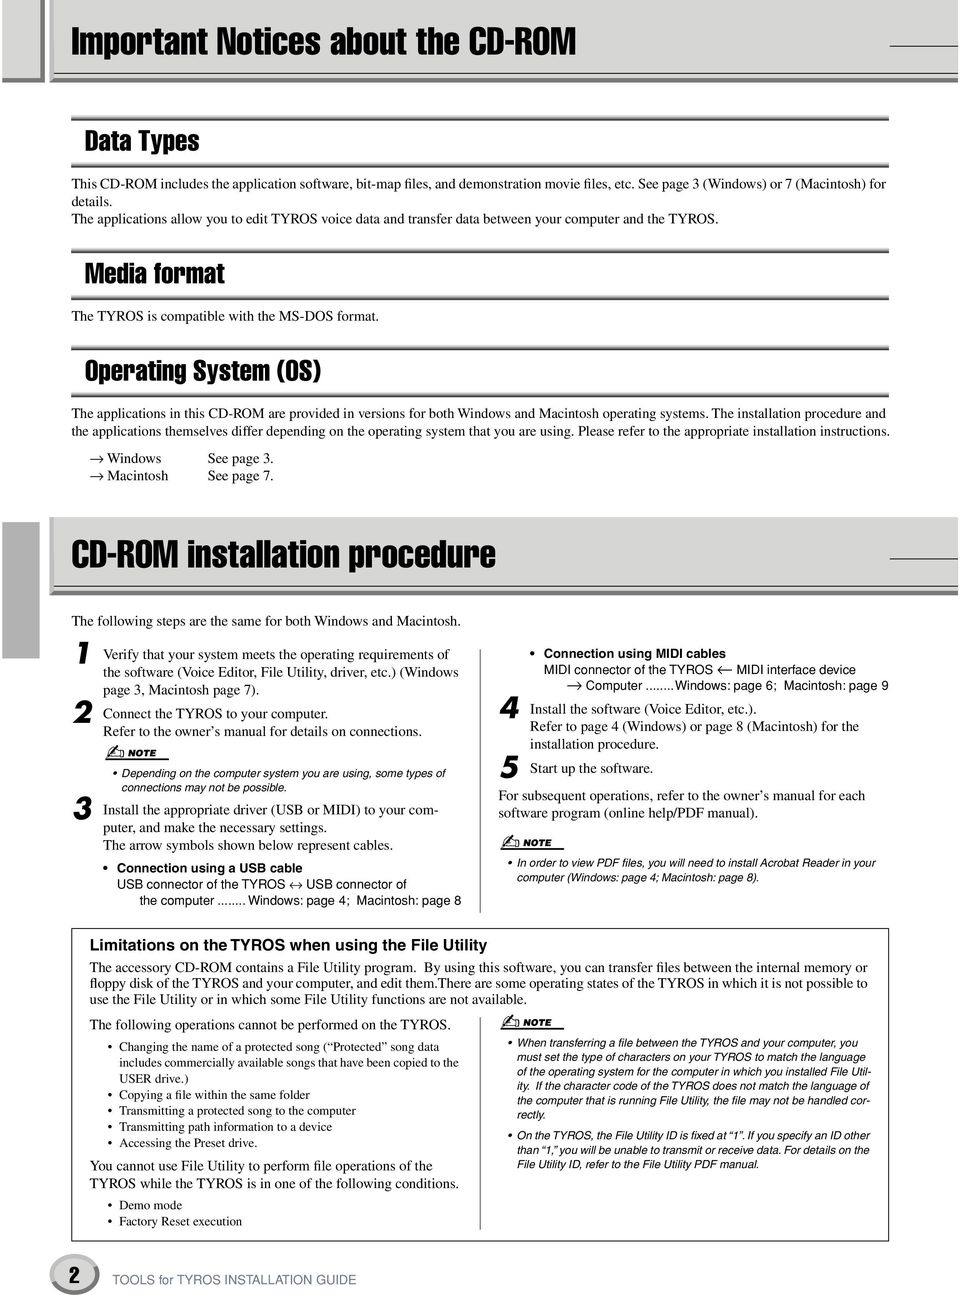 Operating System (OS) The applications in this CD-ROM are provided in versions for both Windows and Macintosh operating systems.